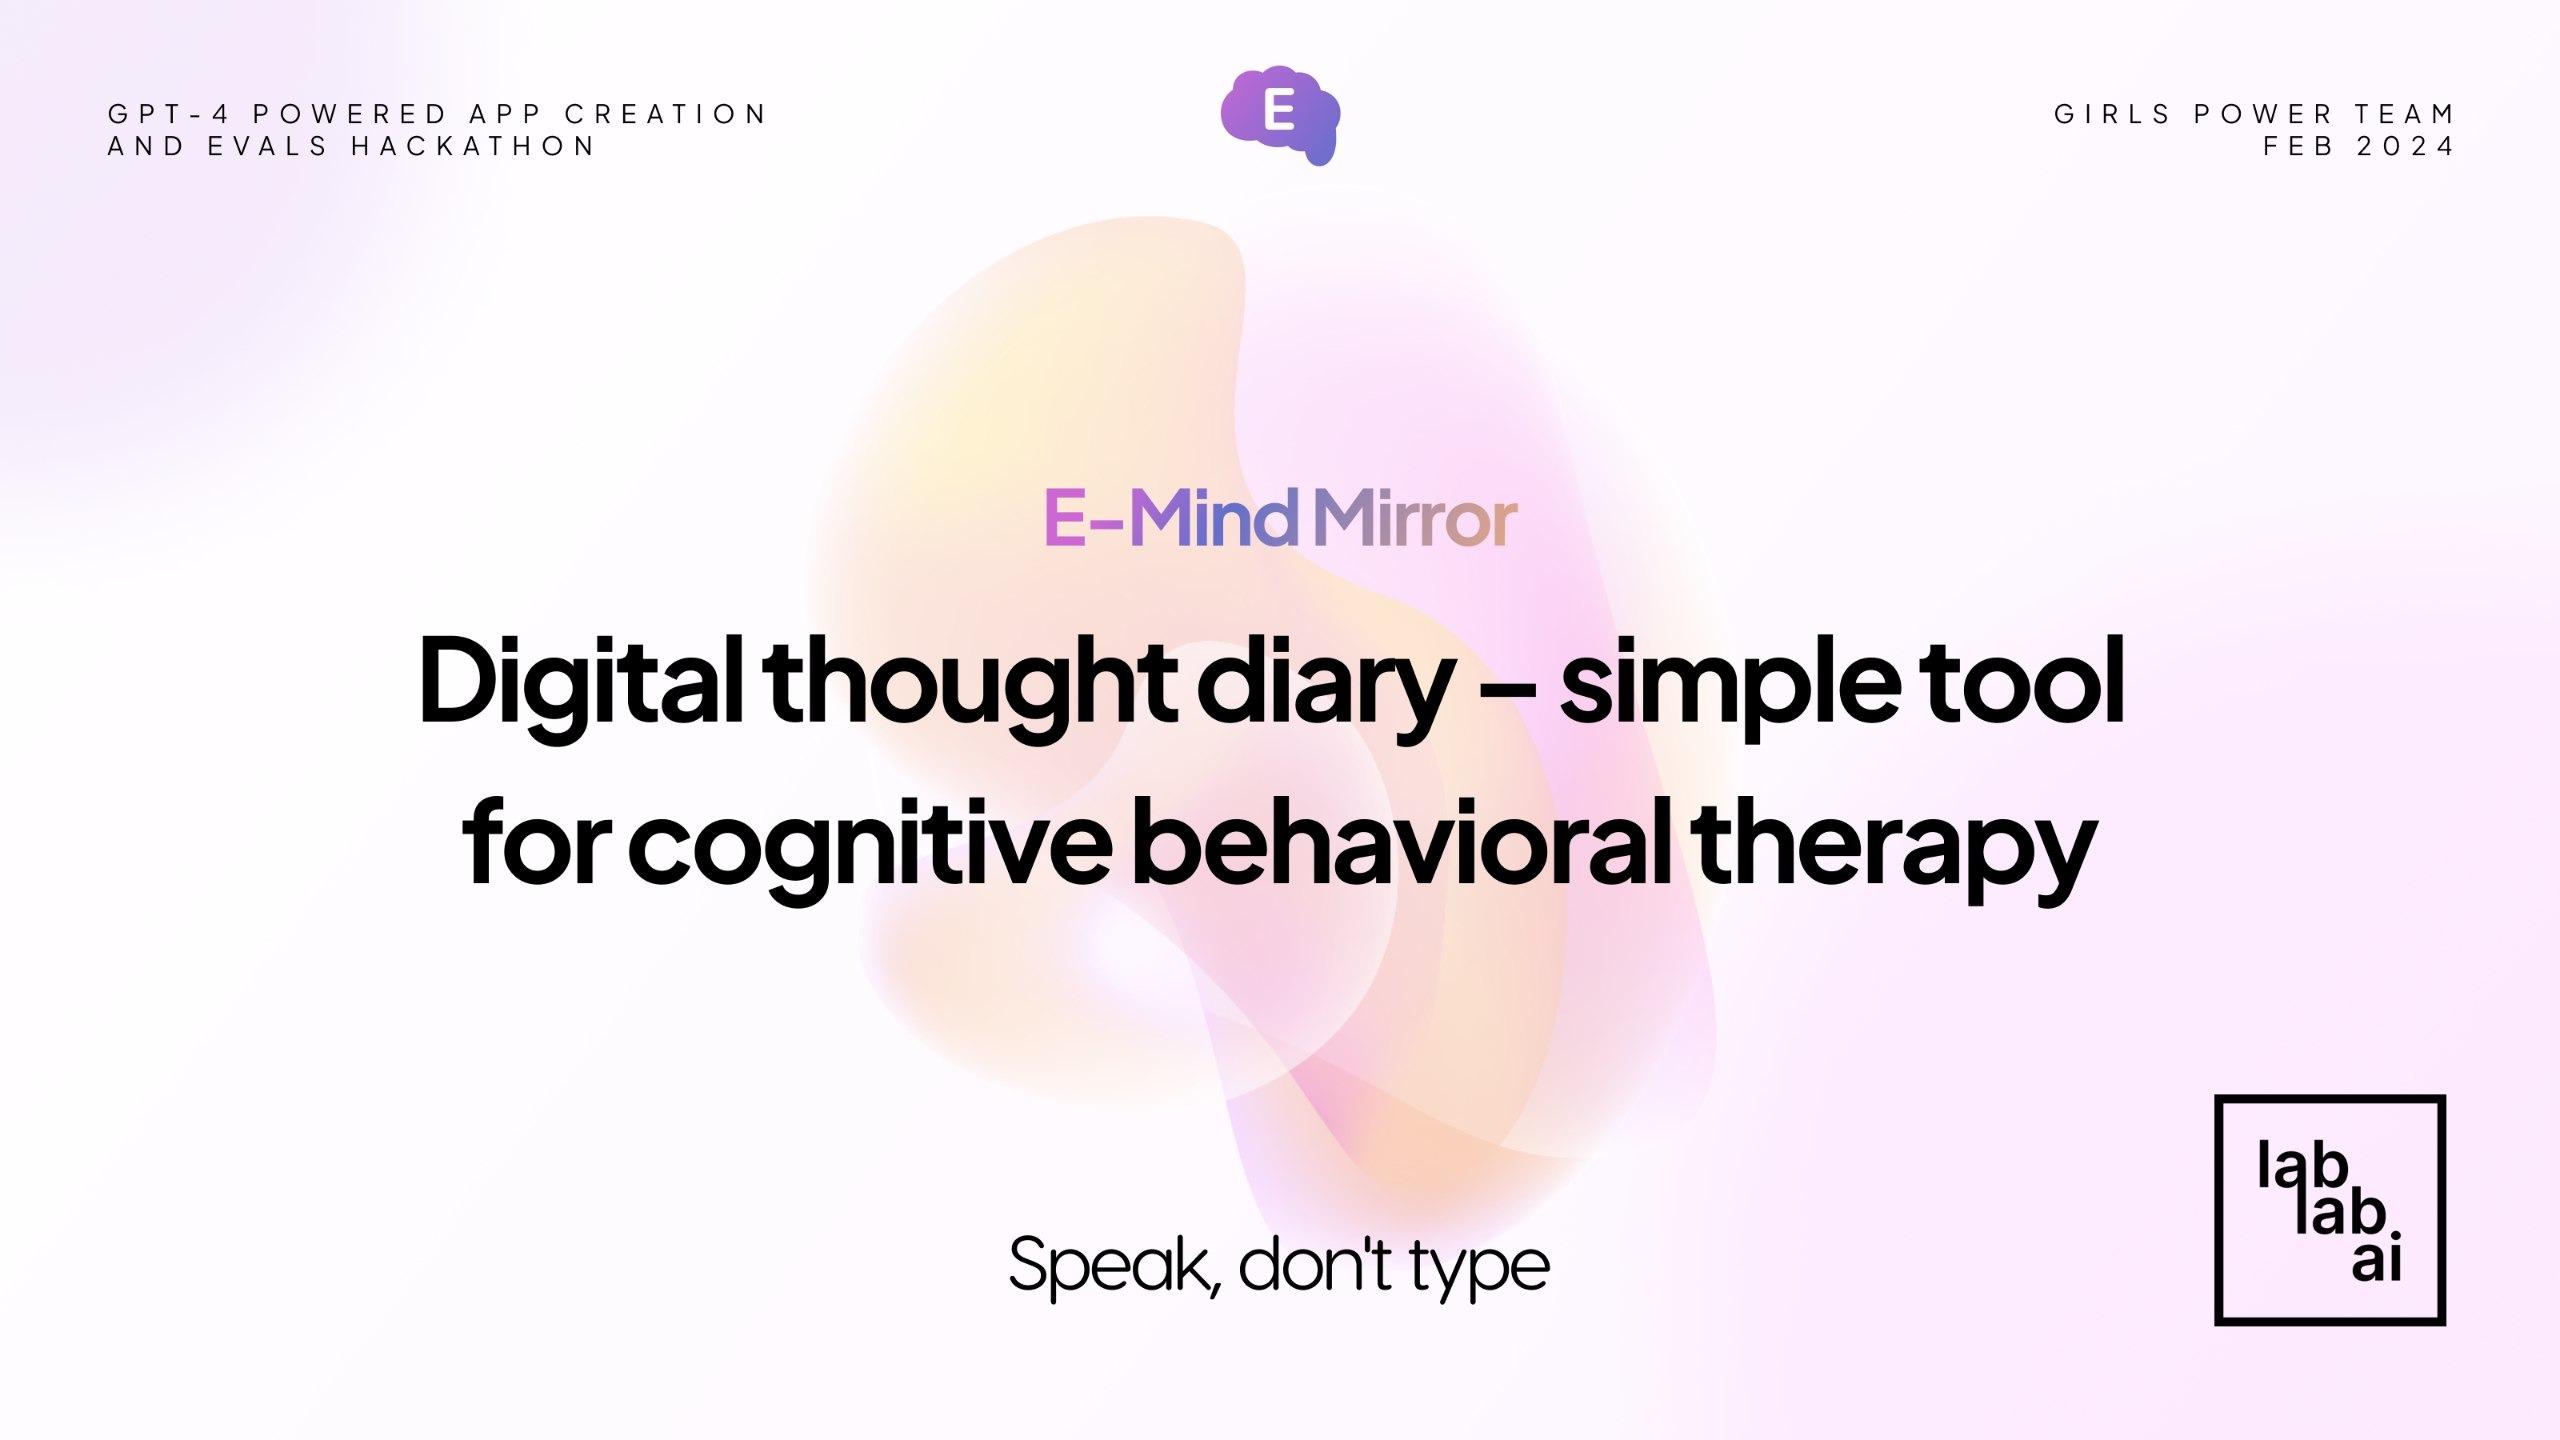 E-Mind Mirror App - Your Digital Thought Diary 